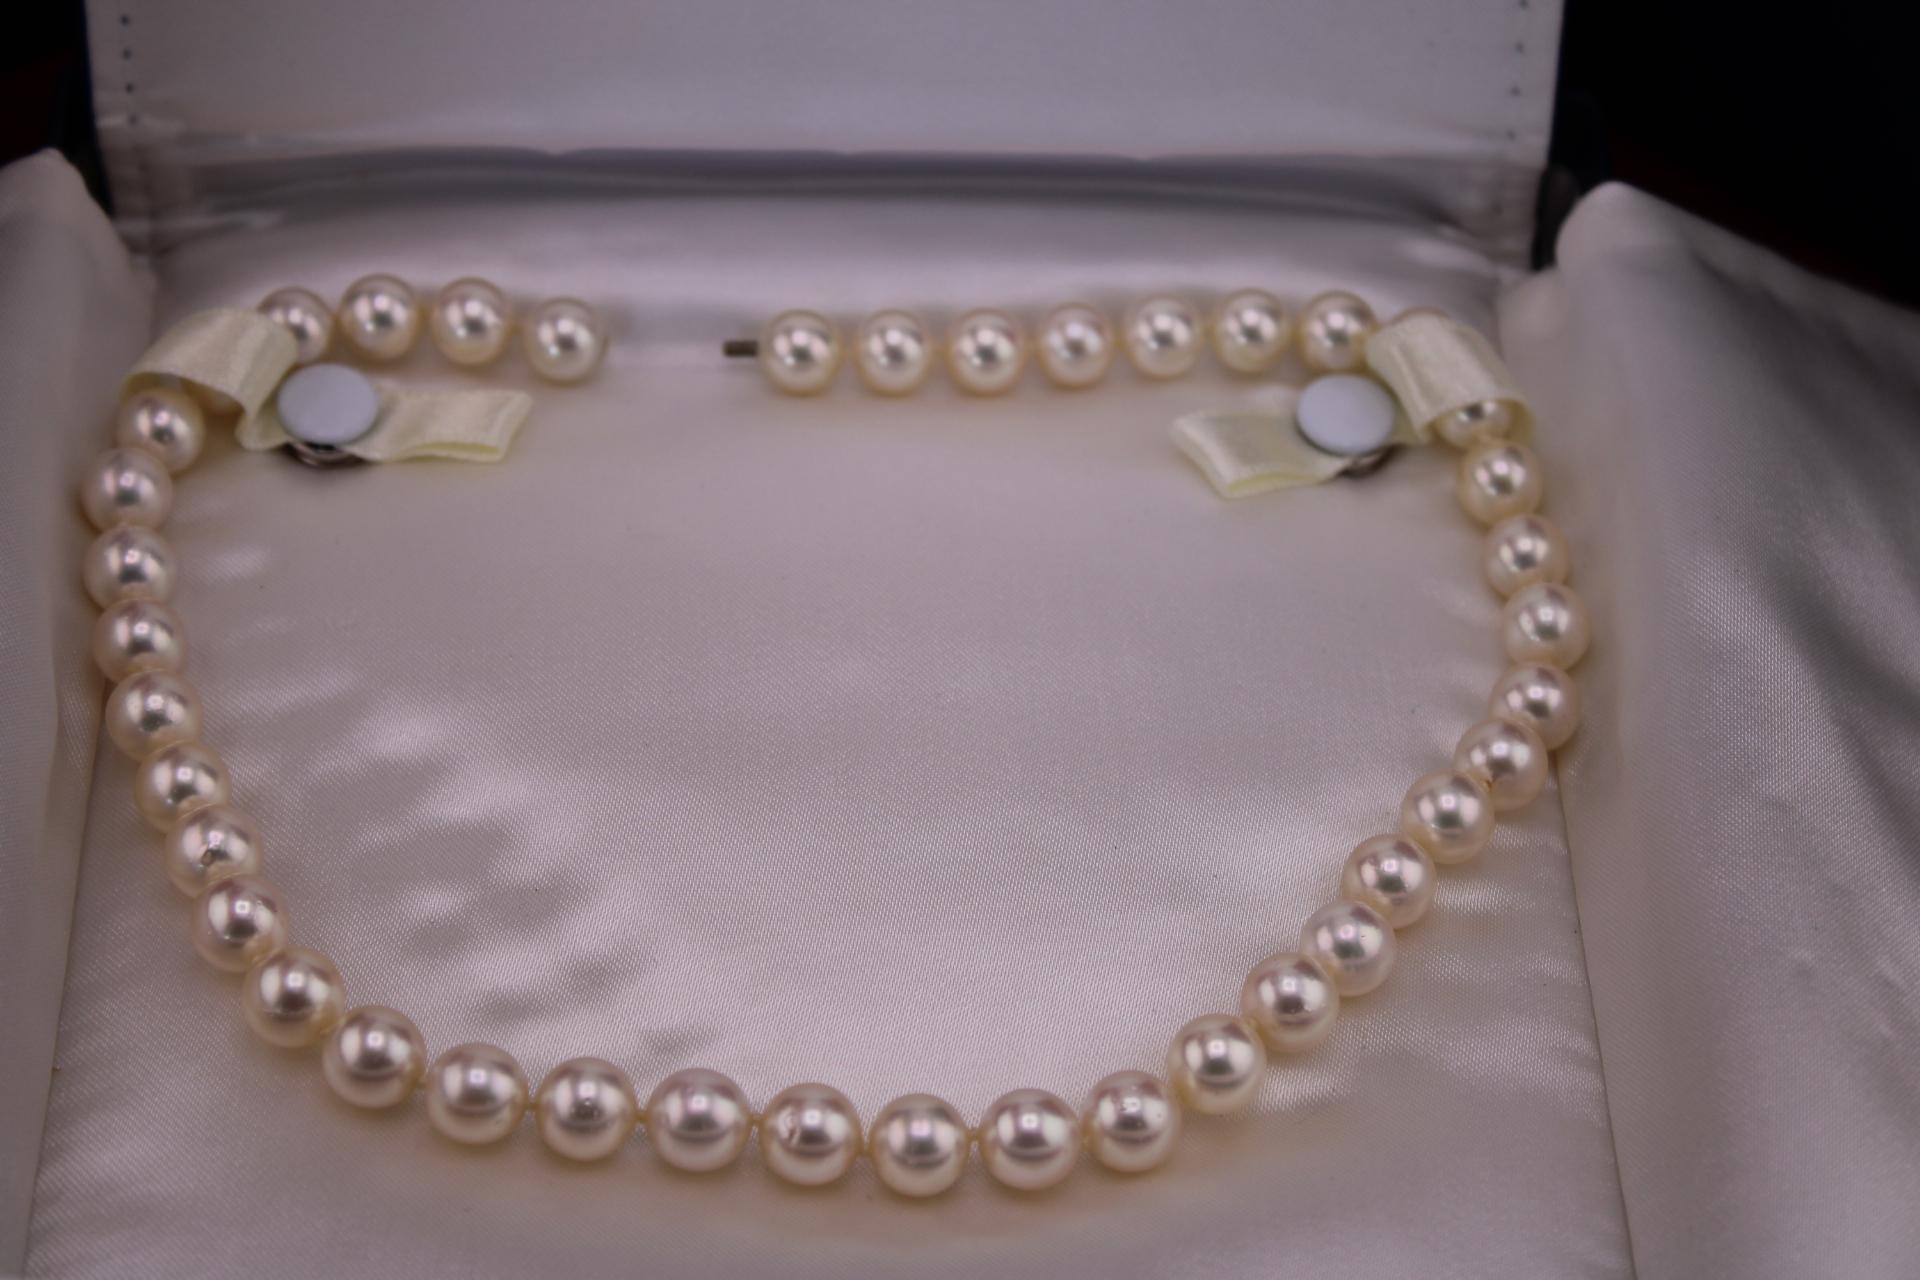 Bailey Banks and Biddle 15.”5 Cultured Pearls.